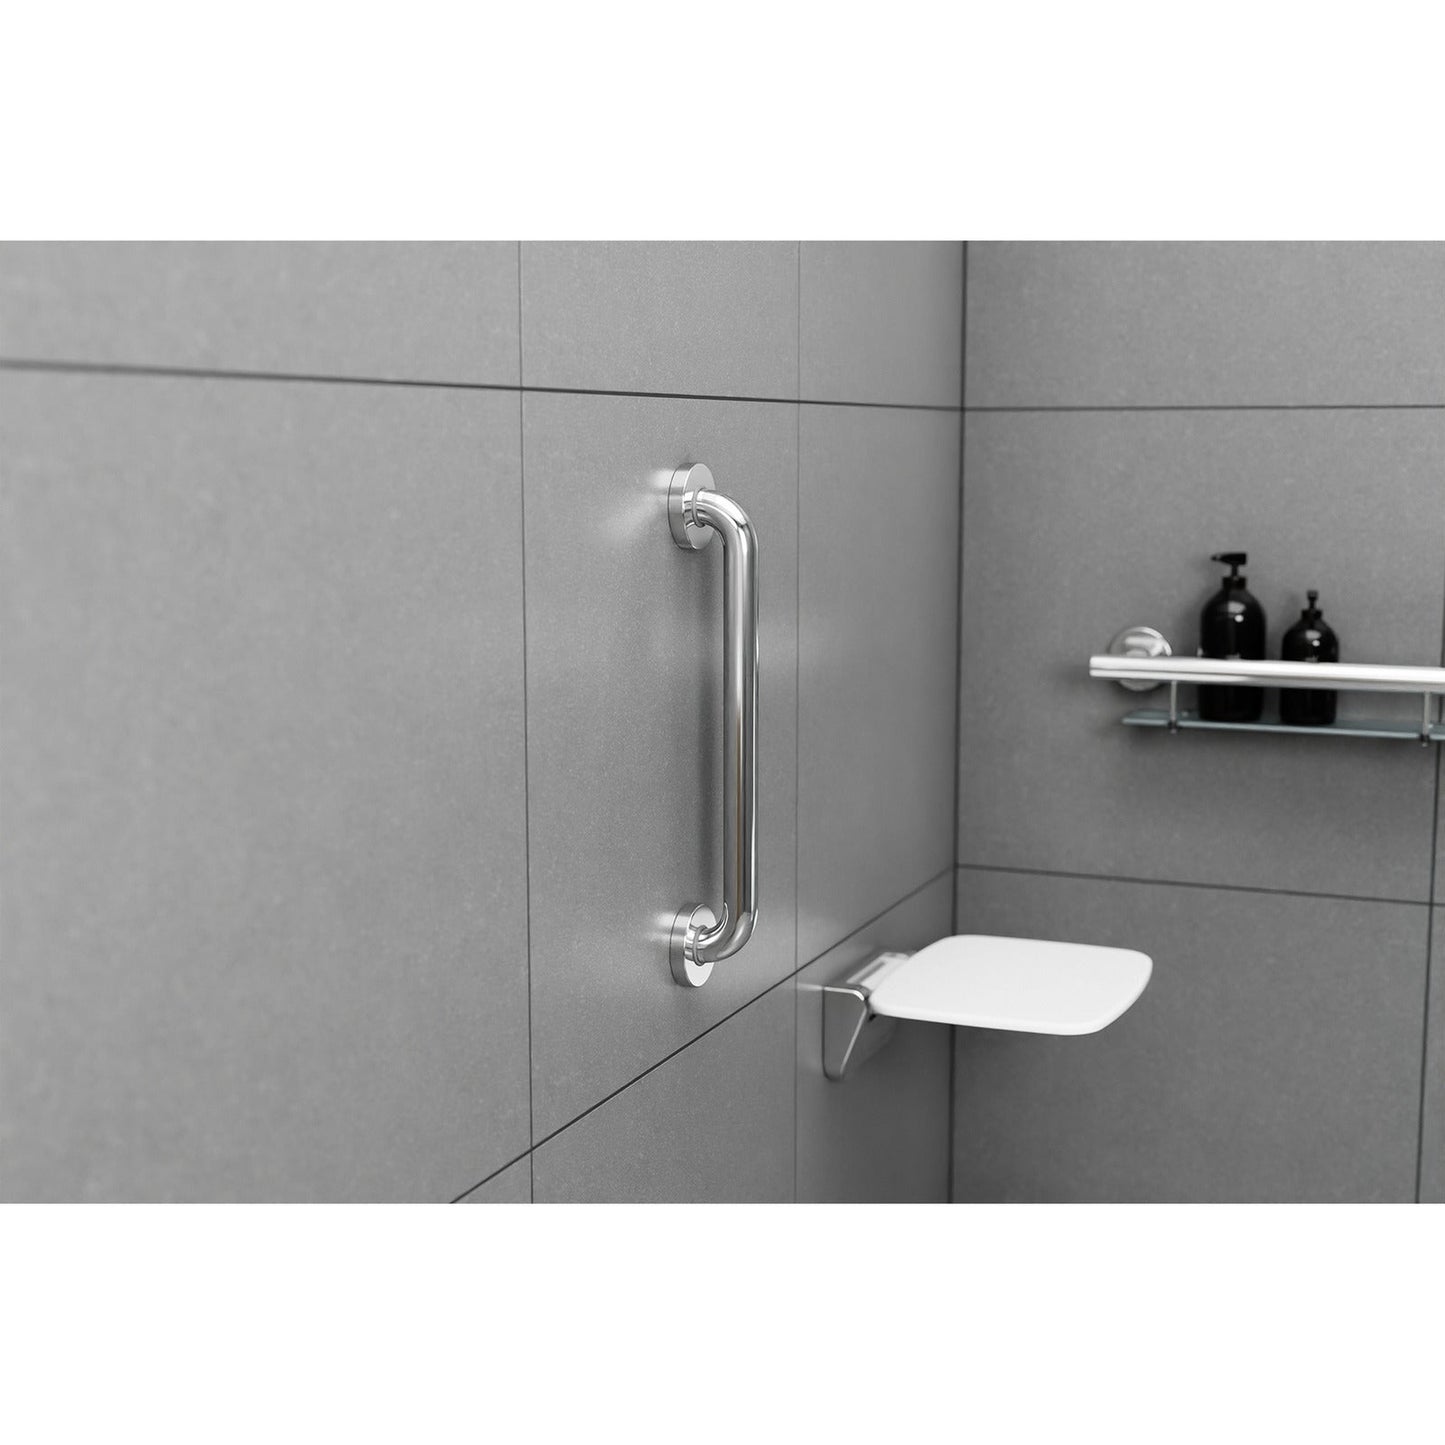 Evekare 16" x 1.25" Polished Stainless Steel Concealed Mount Grab Bar